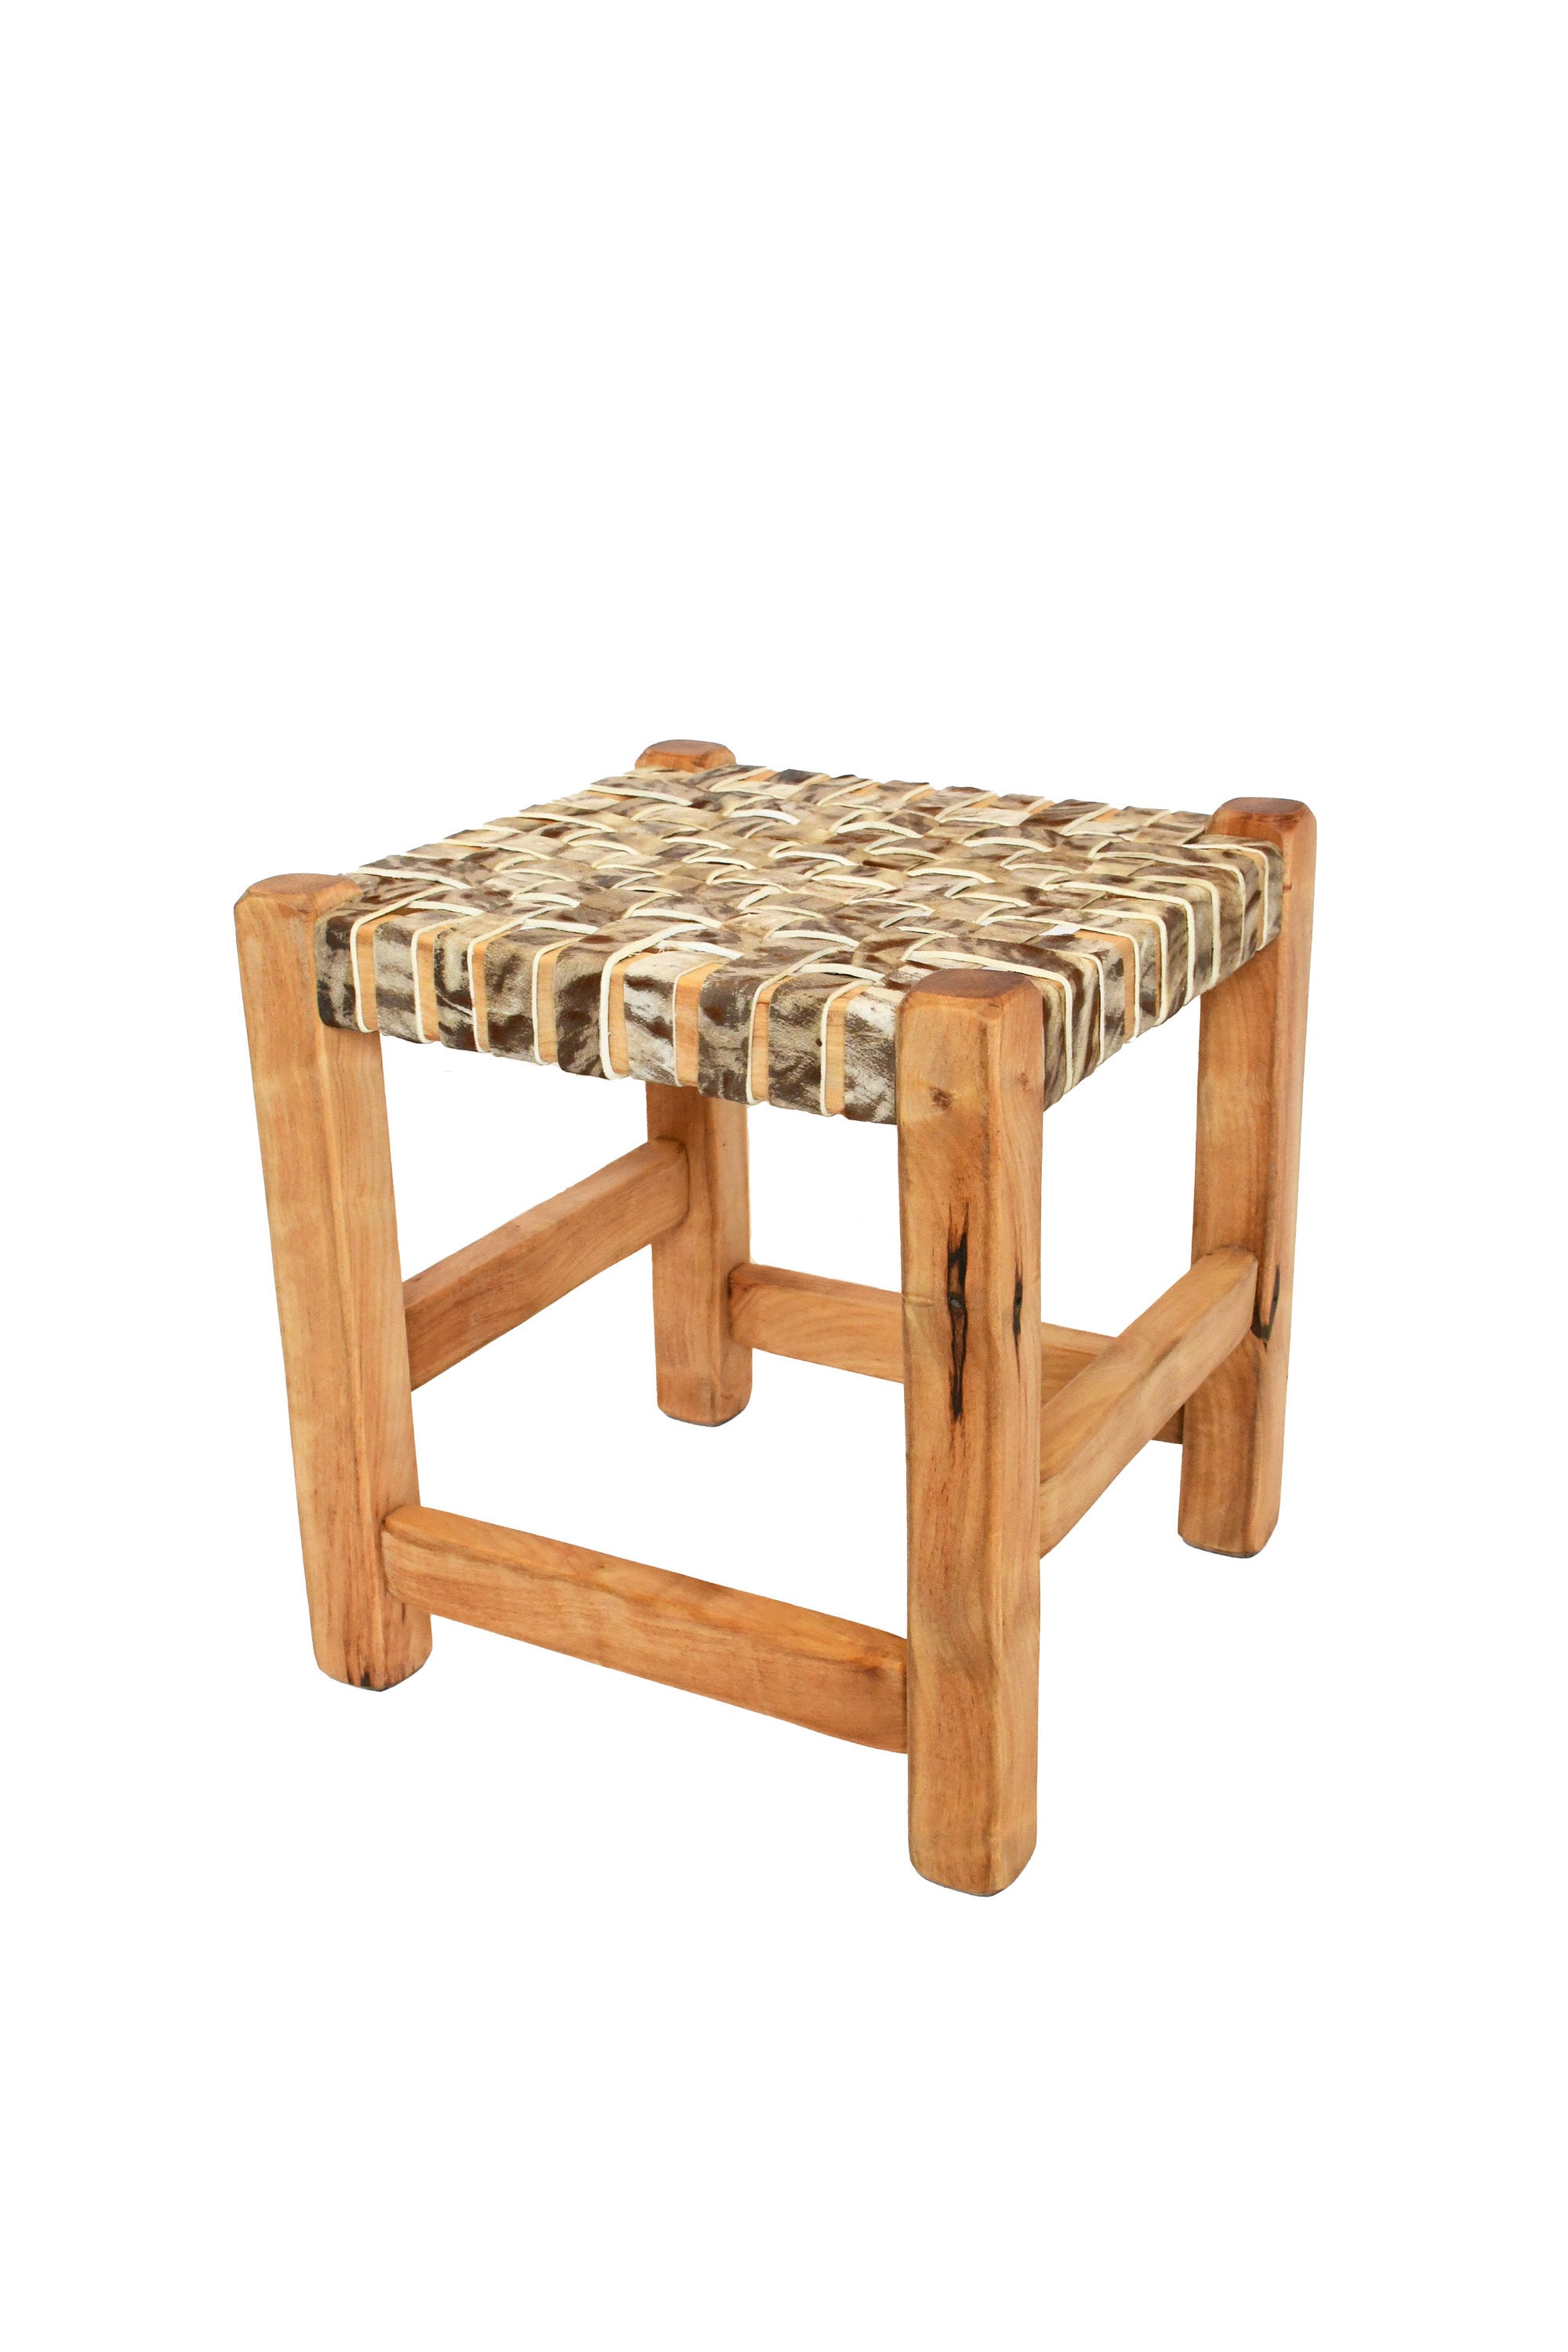 Gaucholife Home Handmade stool with rawhide leather seat